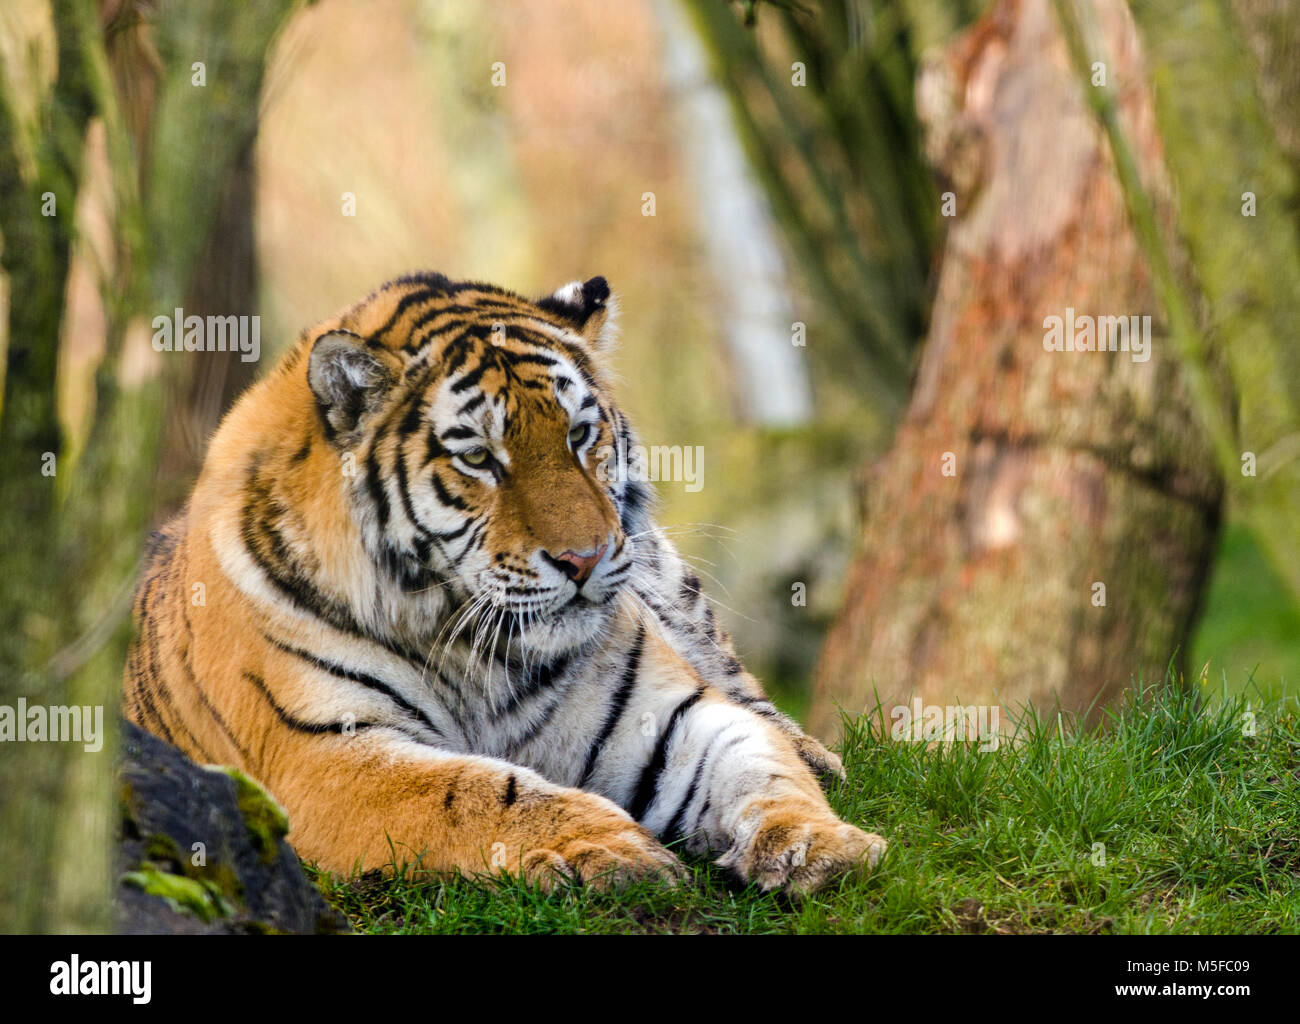 An Amur Tiger rests and surveys its territory Stock Photo